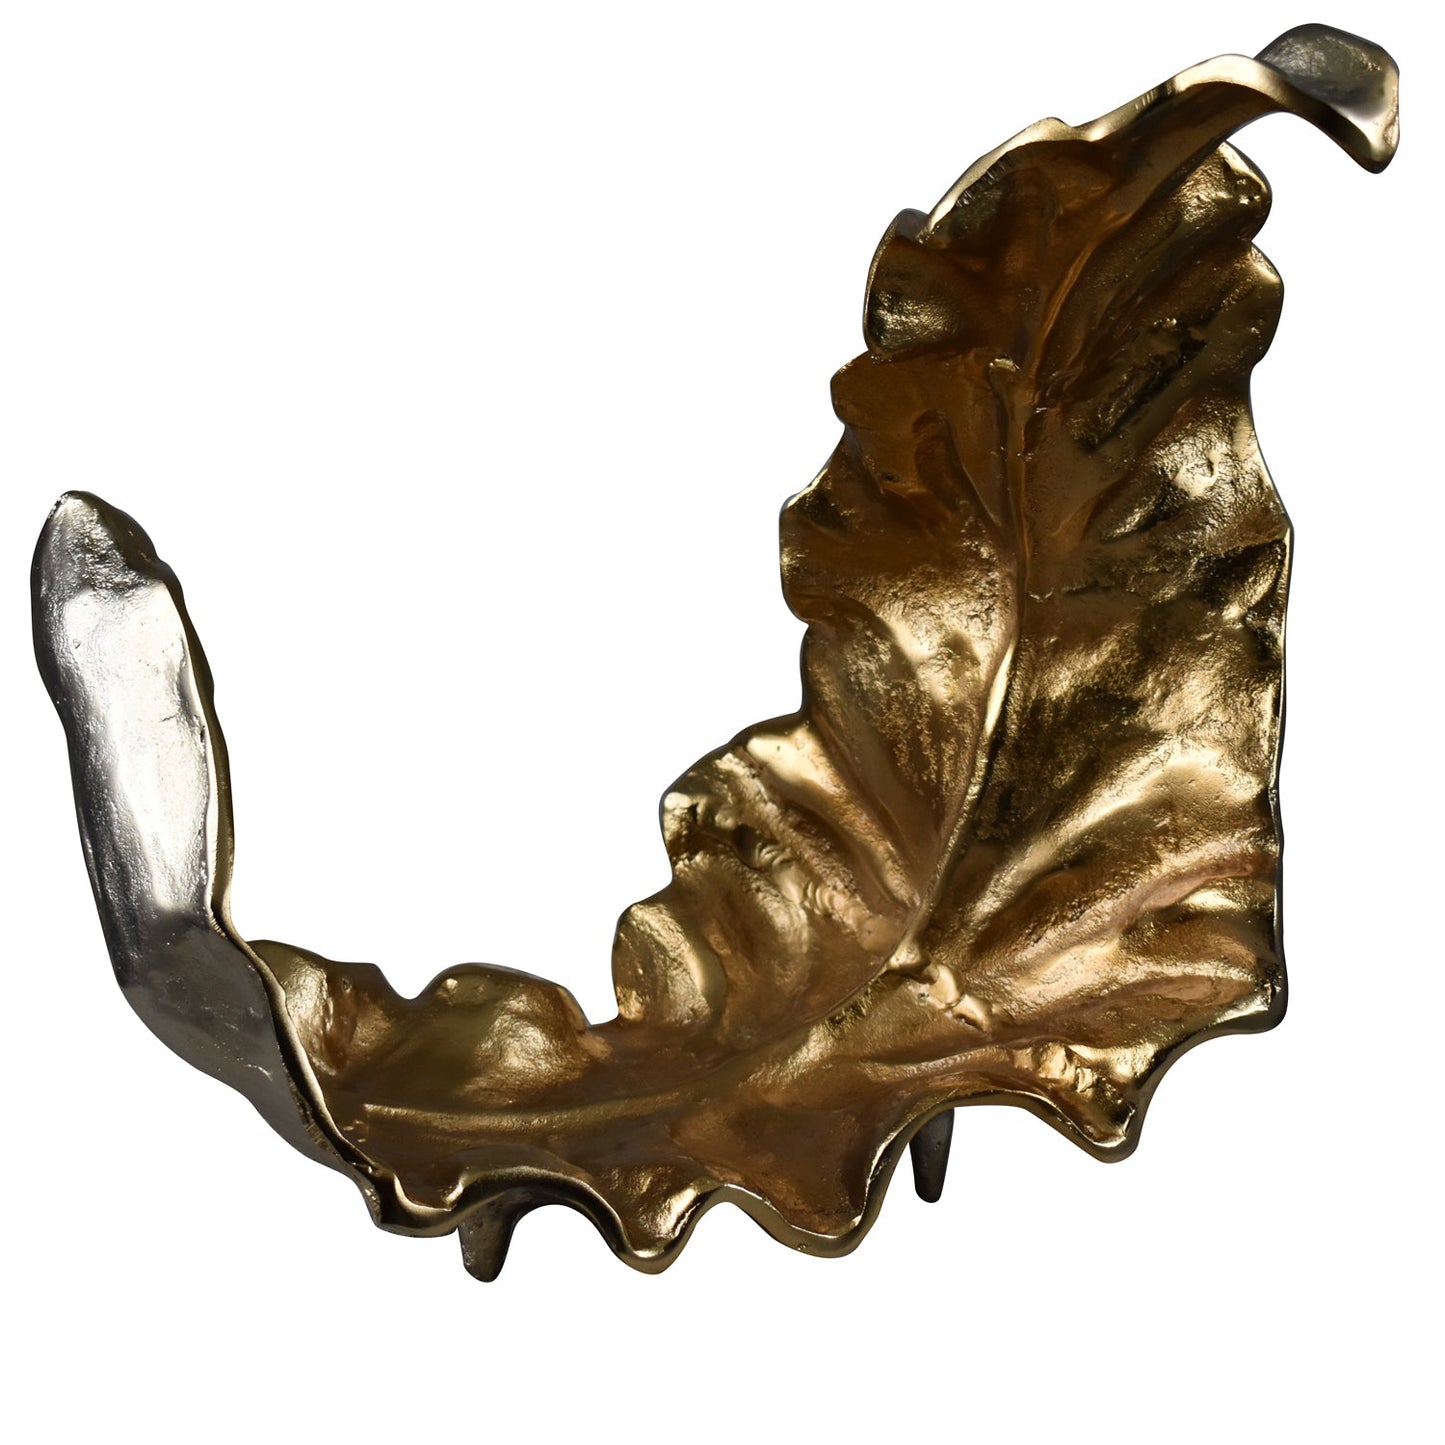 Crestview Collection Willow 20" x 16" x 15" Transitional Aluminum Larger Two-Toned Sculptural Leaf In Gold and Silver Finish